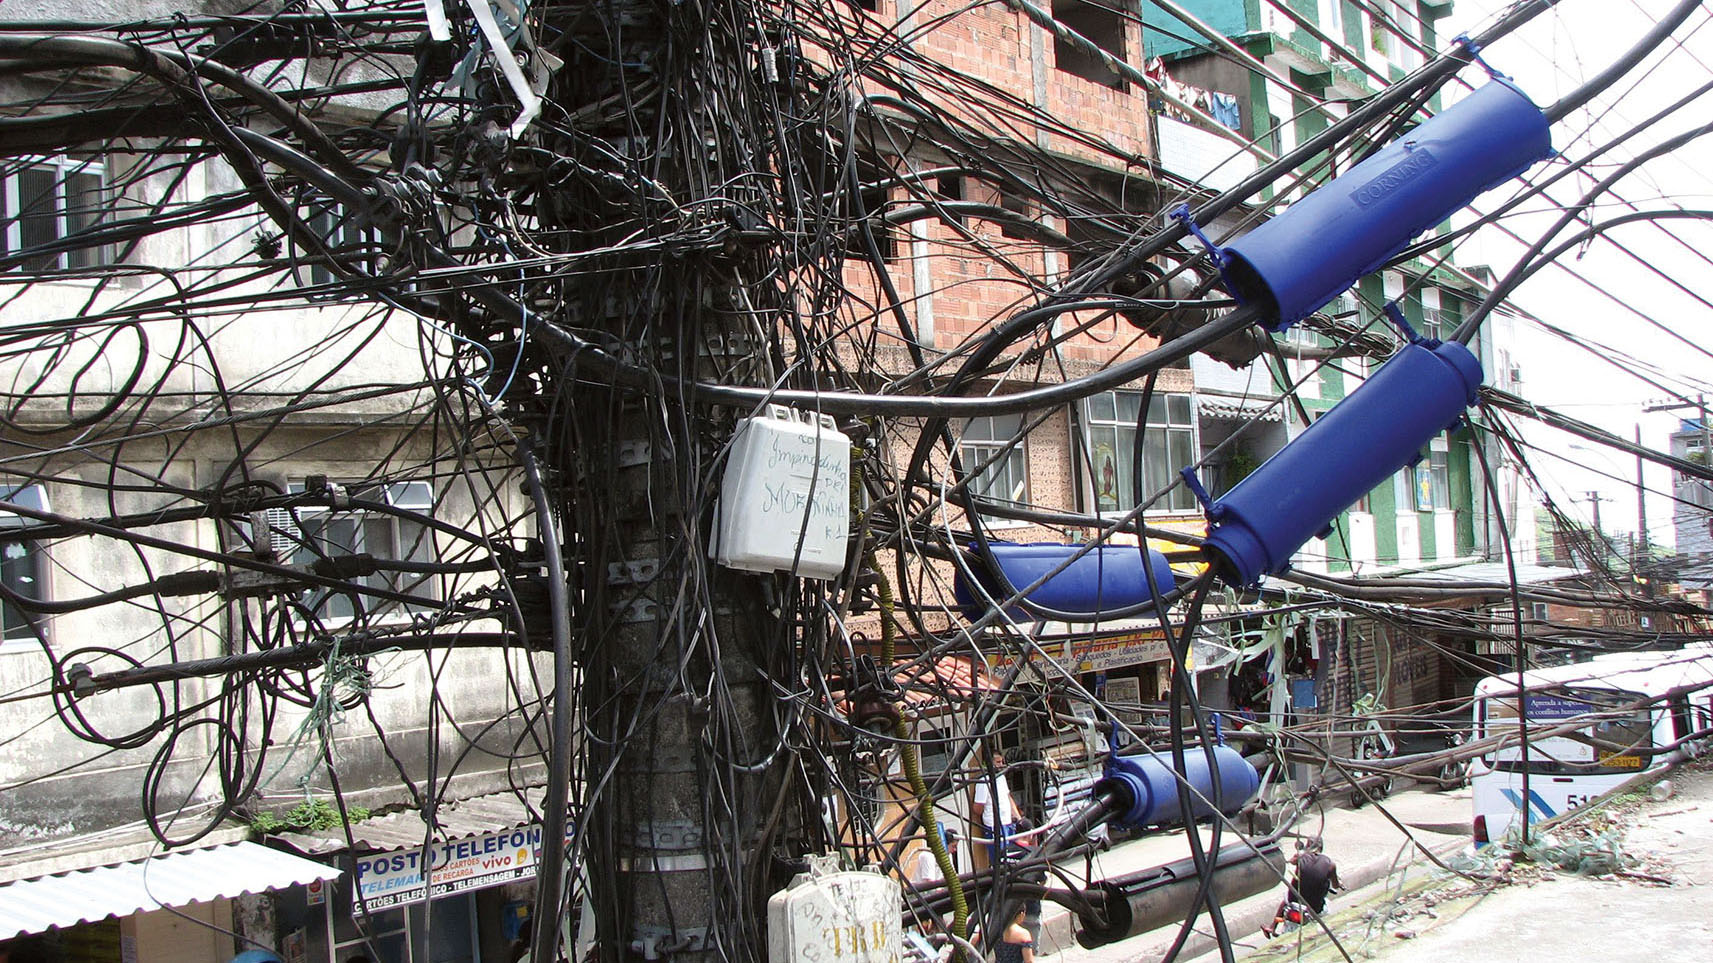 A tangle of wires on a power pole show that residents of this Brazilian neighborhood illegally tap power lines to access electricity without paying. (Photo by World Resources Council / Jonathan Talbot.)